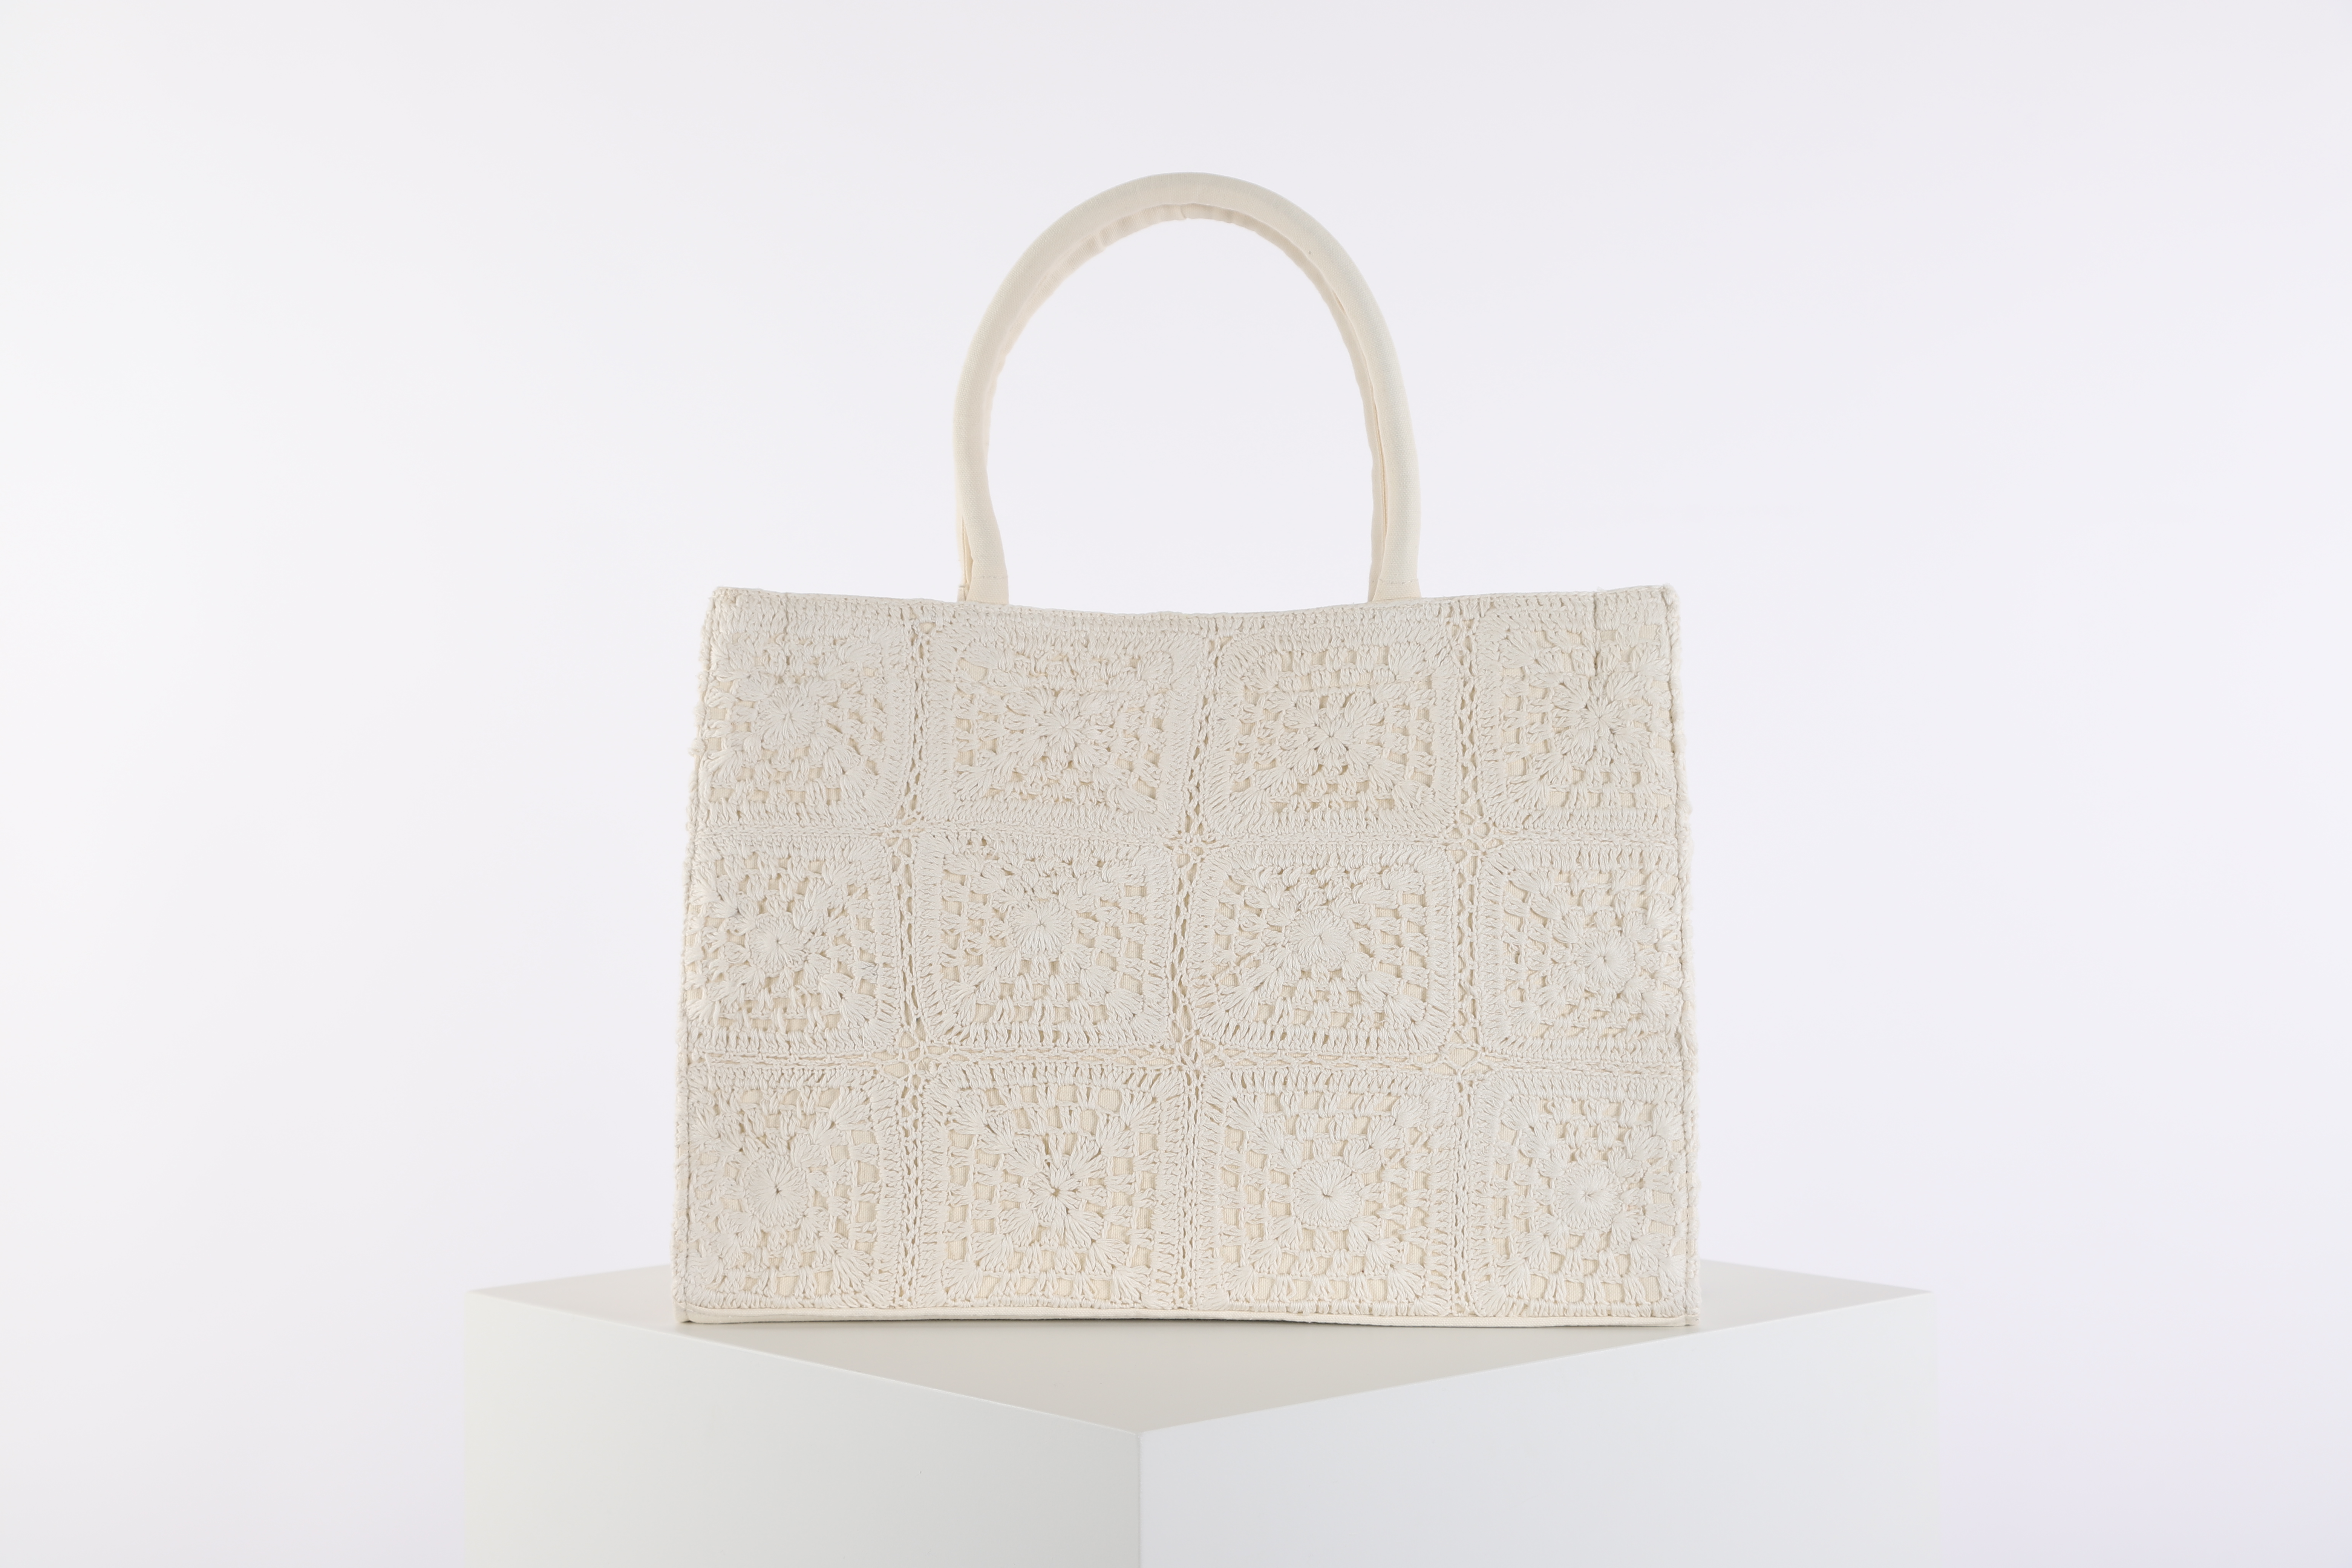 BOOK TOTE LARGE CROCHET - OFF WHITE